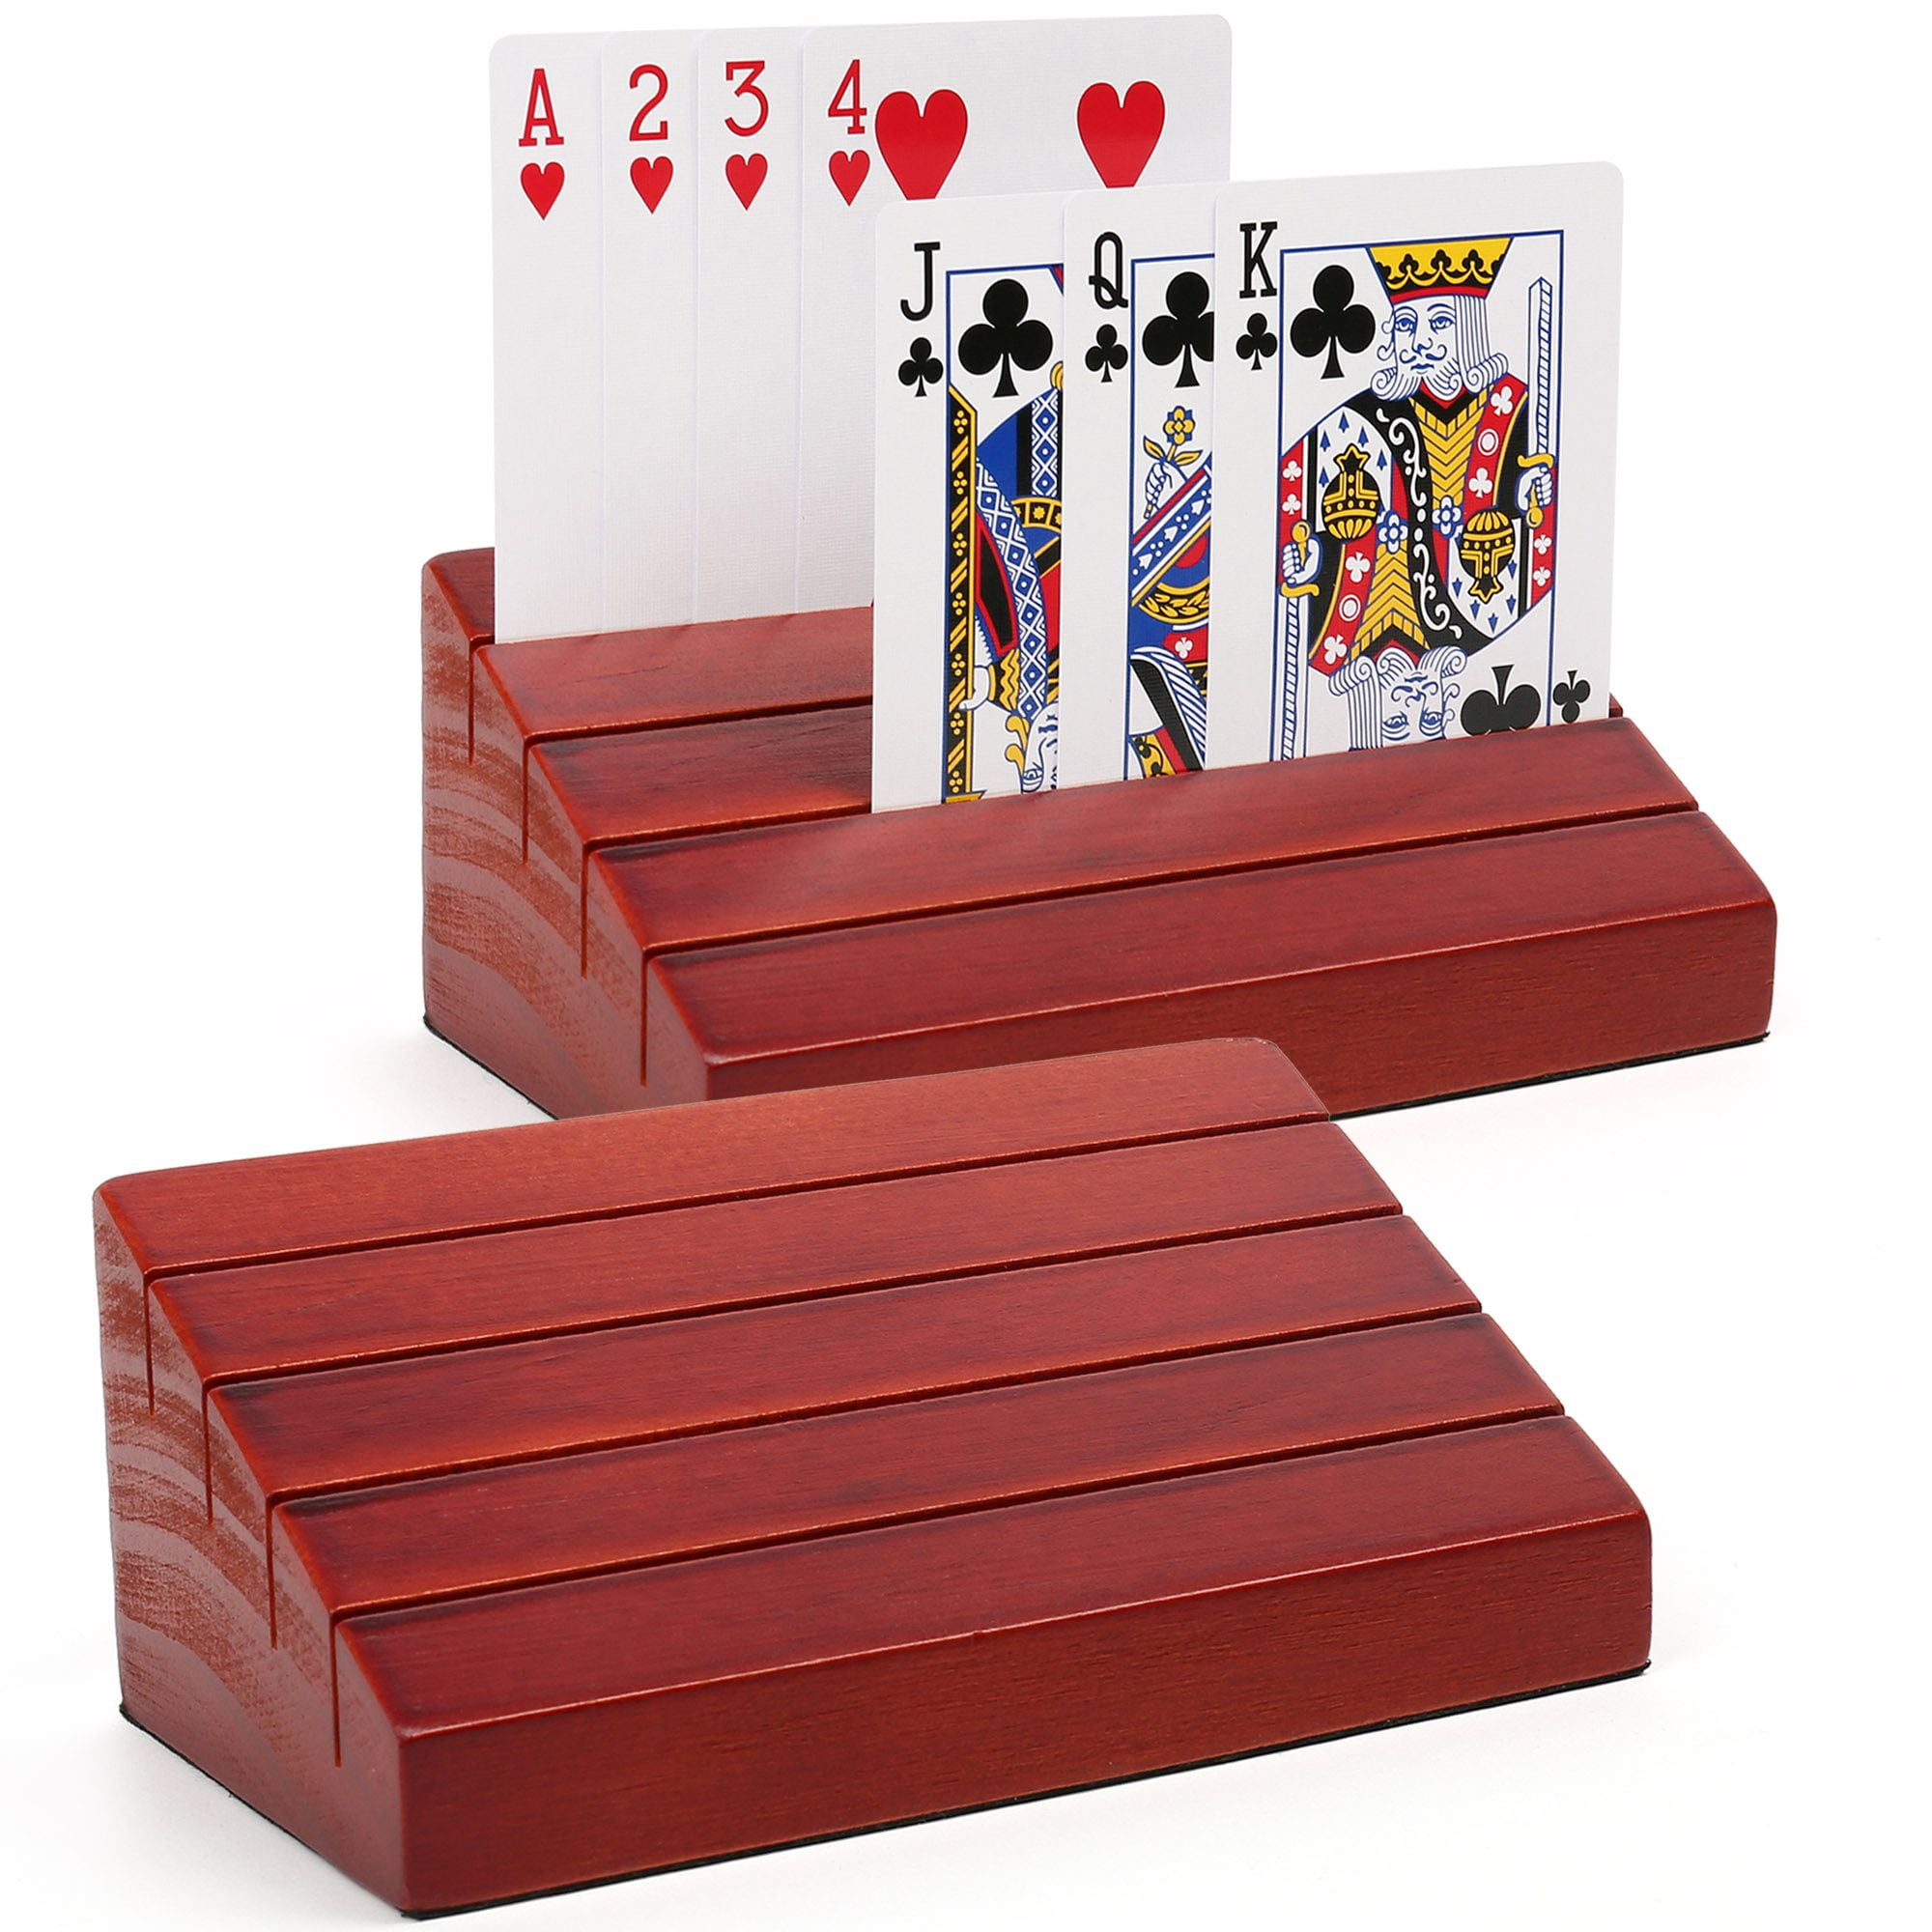 Wooden Playing Card Holders for Kids, Adults and Seniors. Wood Playing Card Tray Racks for Bridge canasta Uno Card Playing GSE Games & Sports